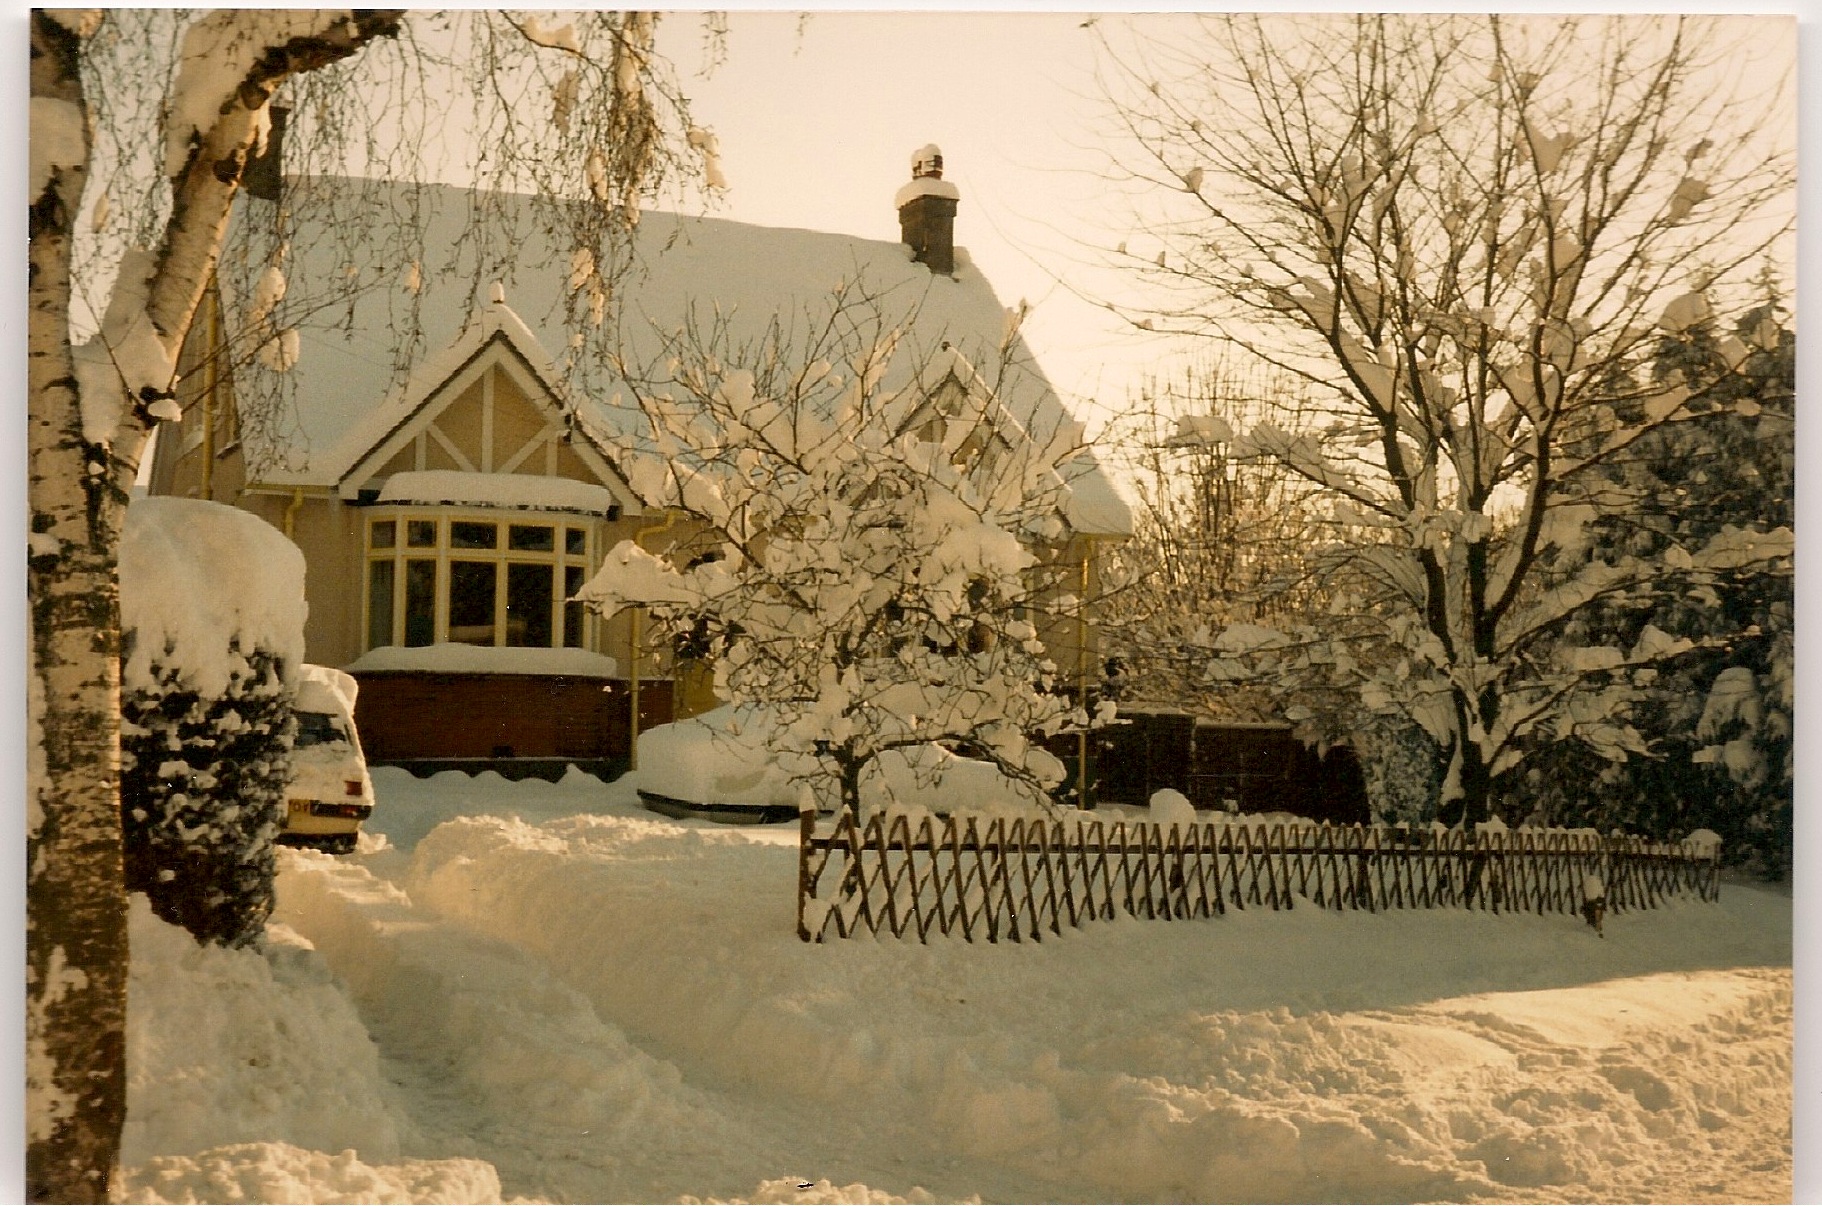  Snow at 27 Wigmore Road in 1987